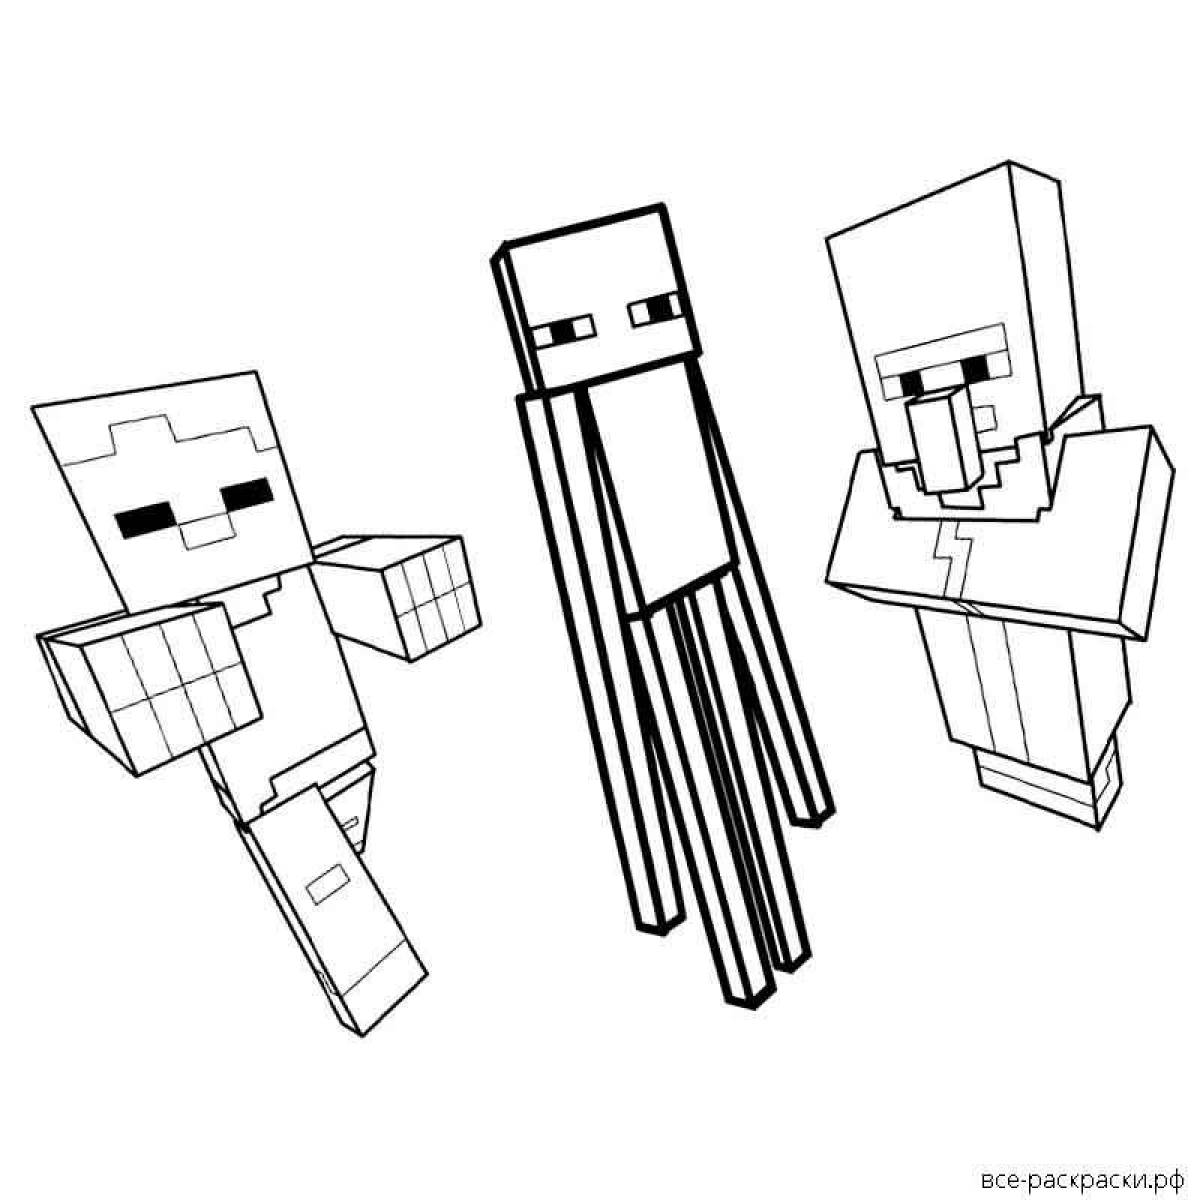 Charming compote coloring minecraft